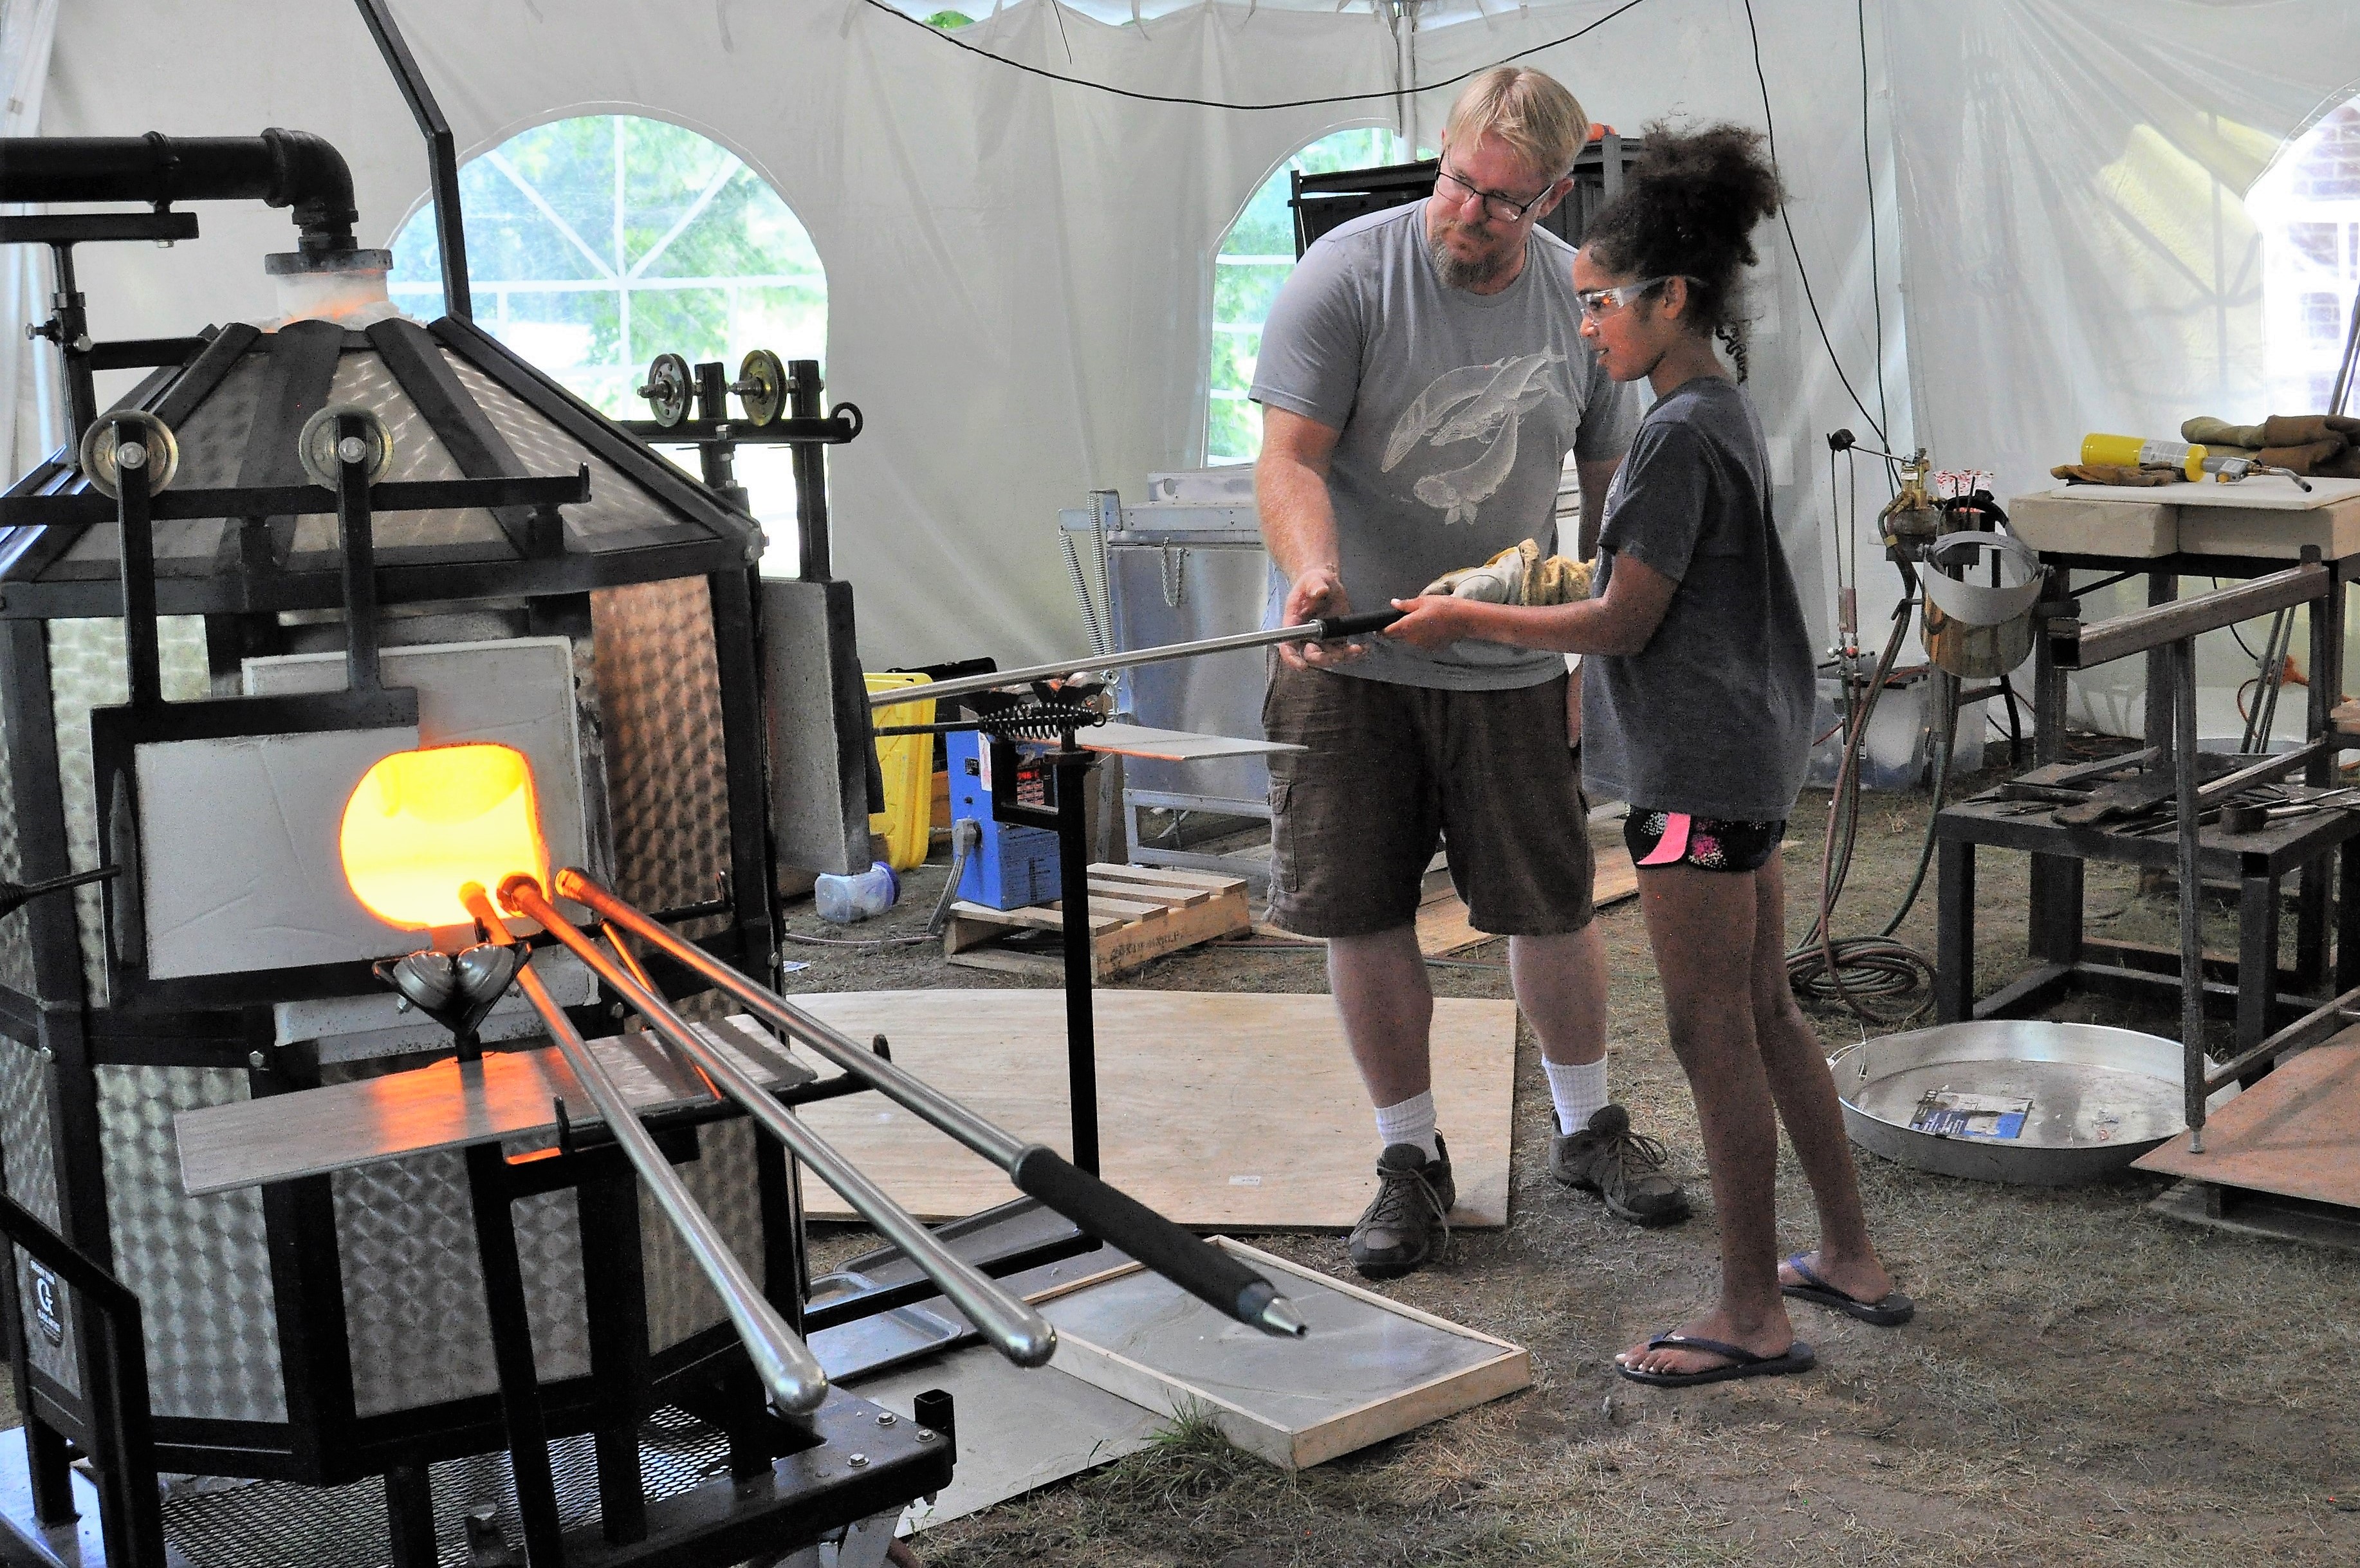 Greg helping his young student put her project in the furnace